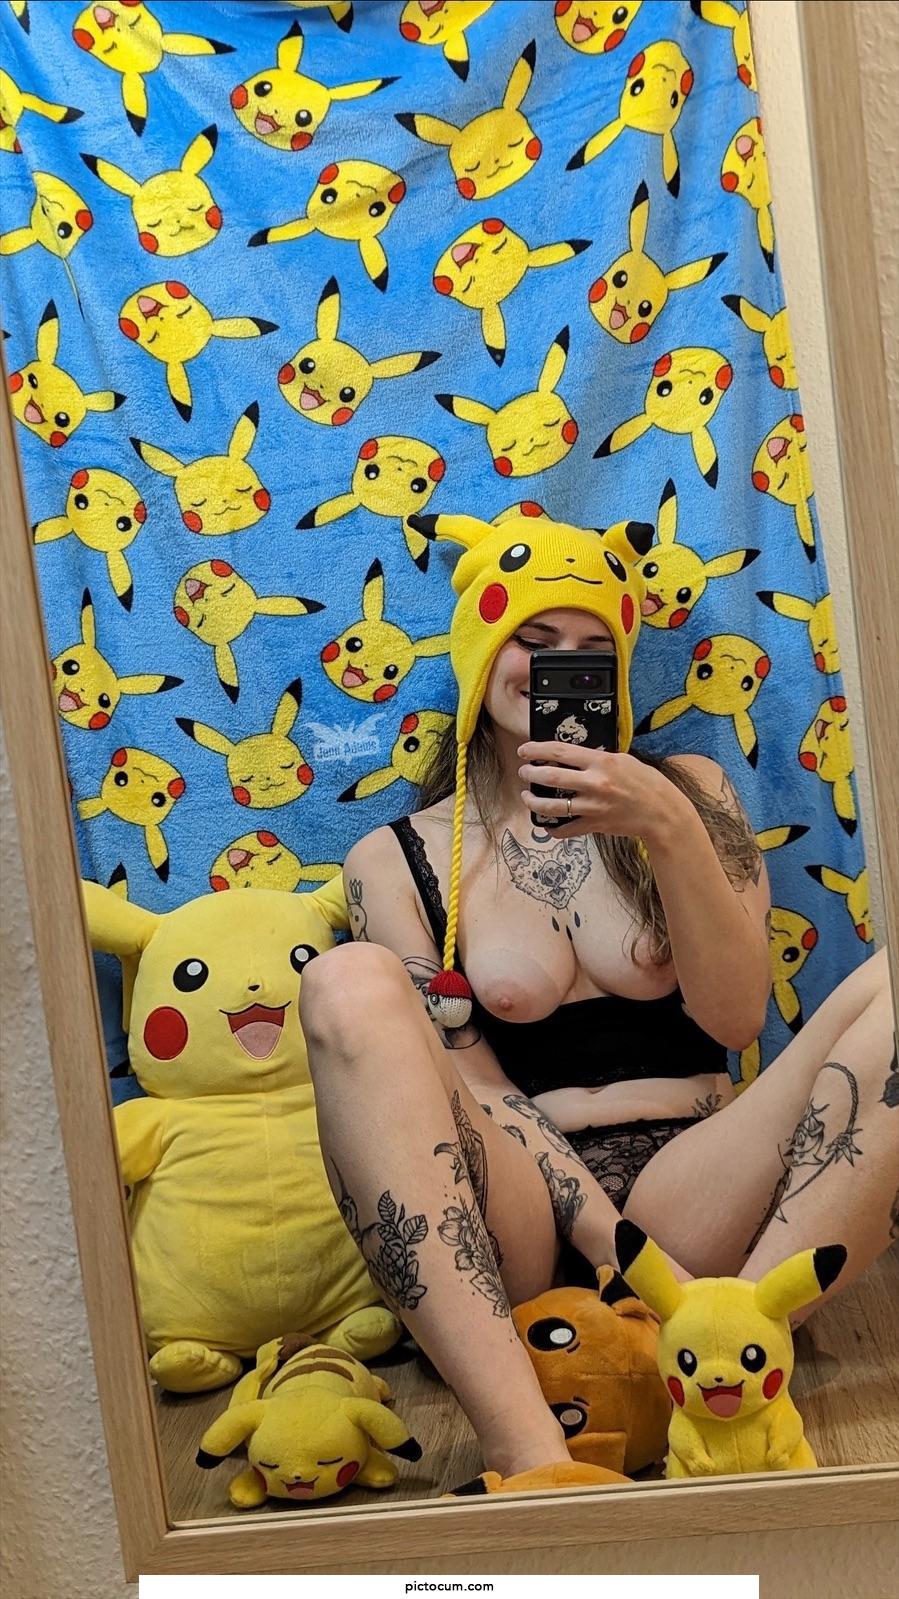 Is it possible to have too many Pikachus?